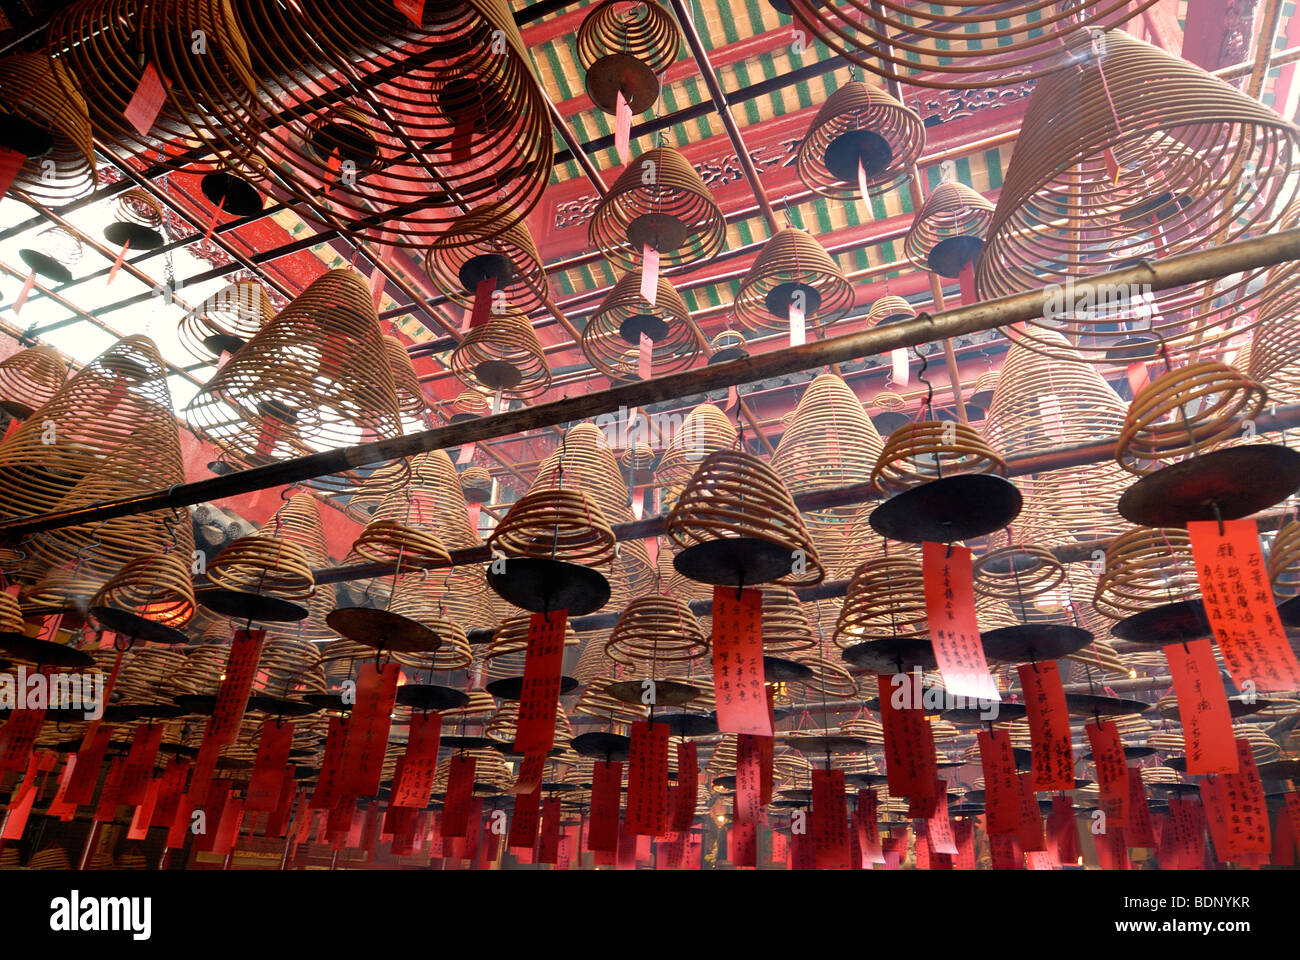 Wound incense as sacrificial offerings in the Man Mo Temple, Hong Kong, China, Asia Stock Photo